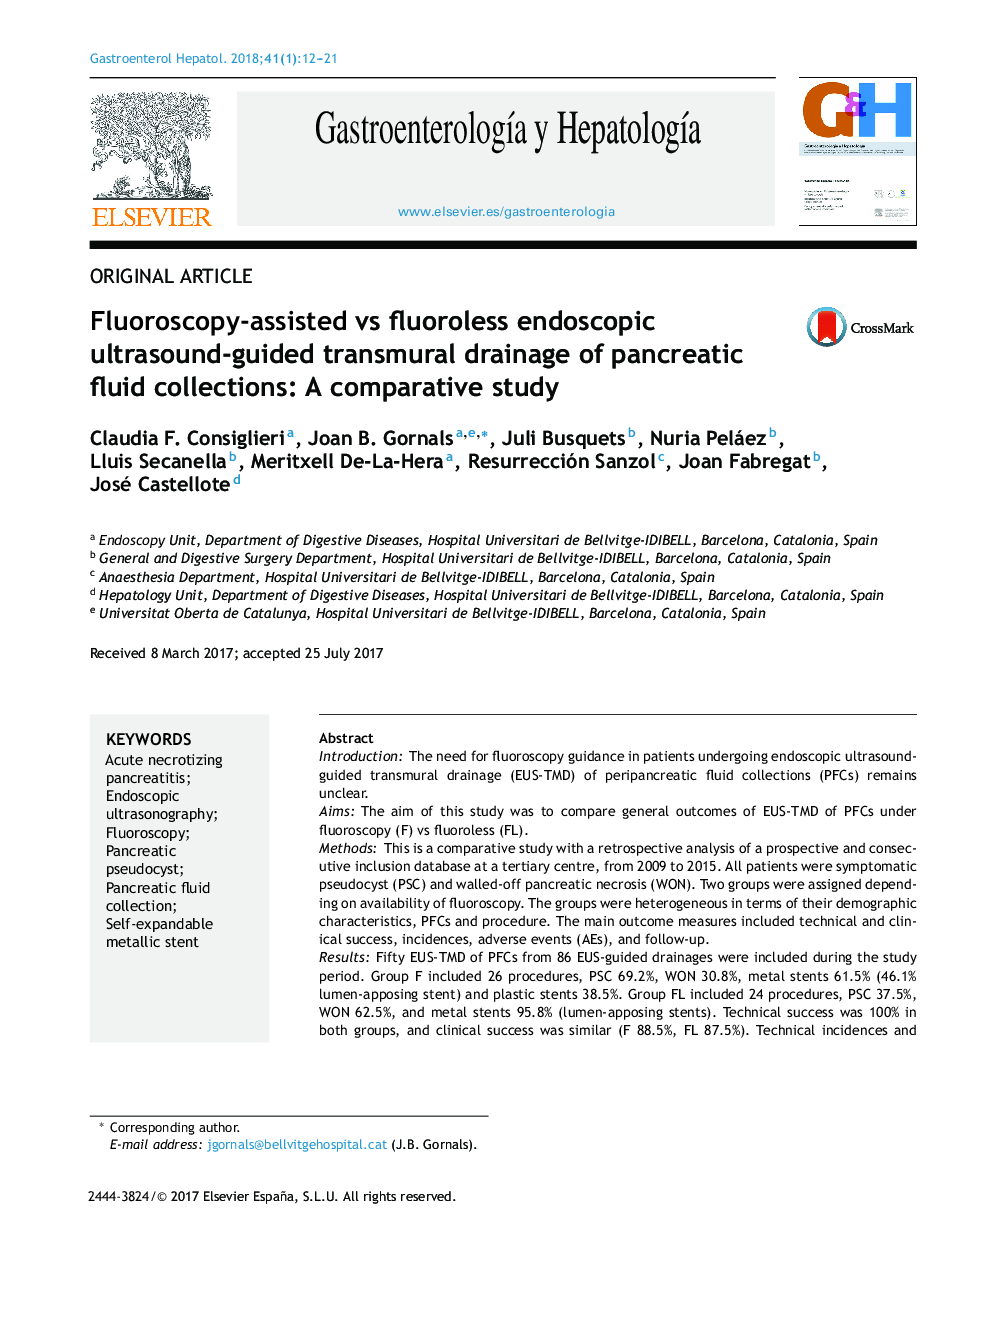 Fluoroscopy-assisted vs fluoroless endoscopic ultrasound-guided transmural drainage of pancreatic fluid collections: A comparative study